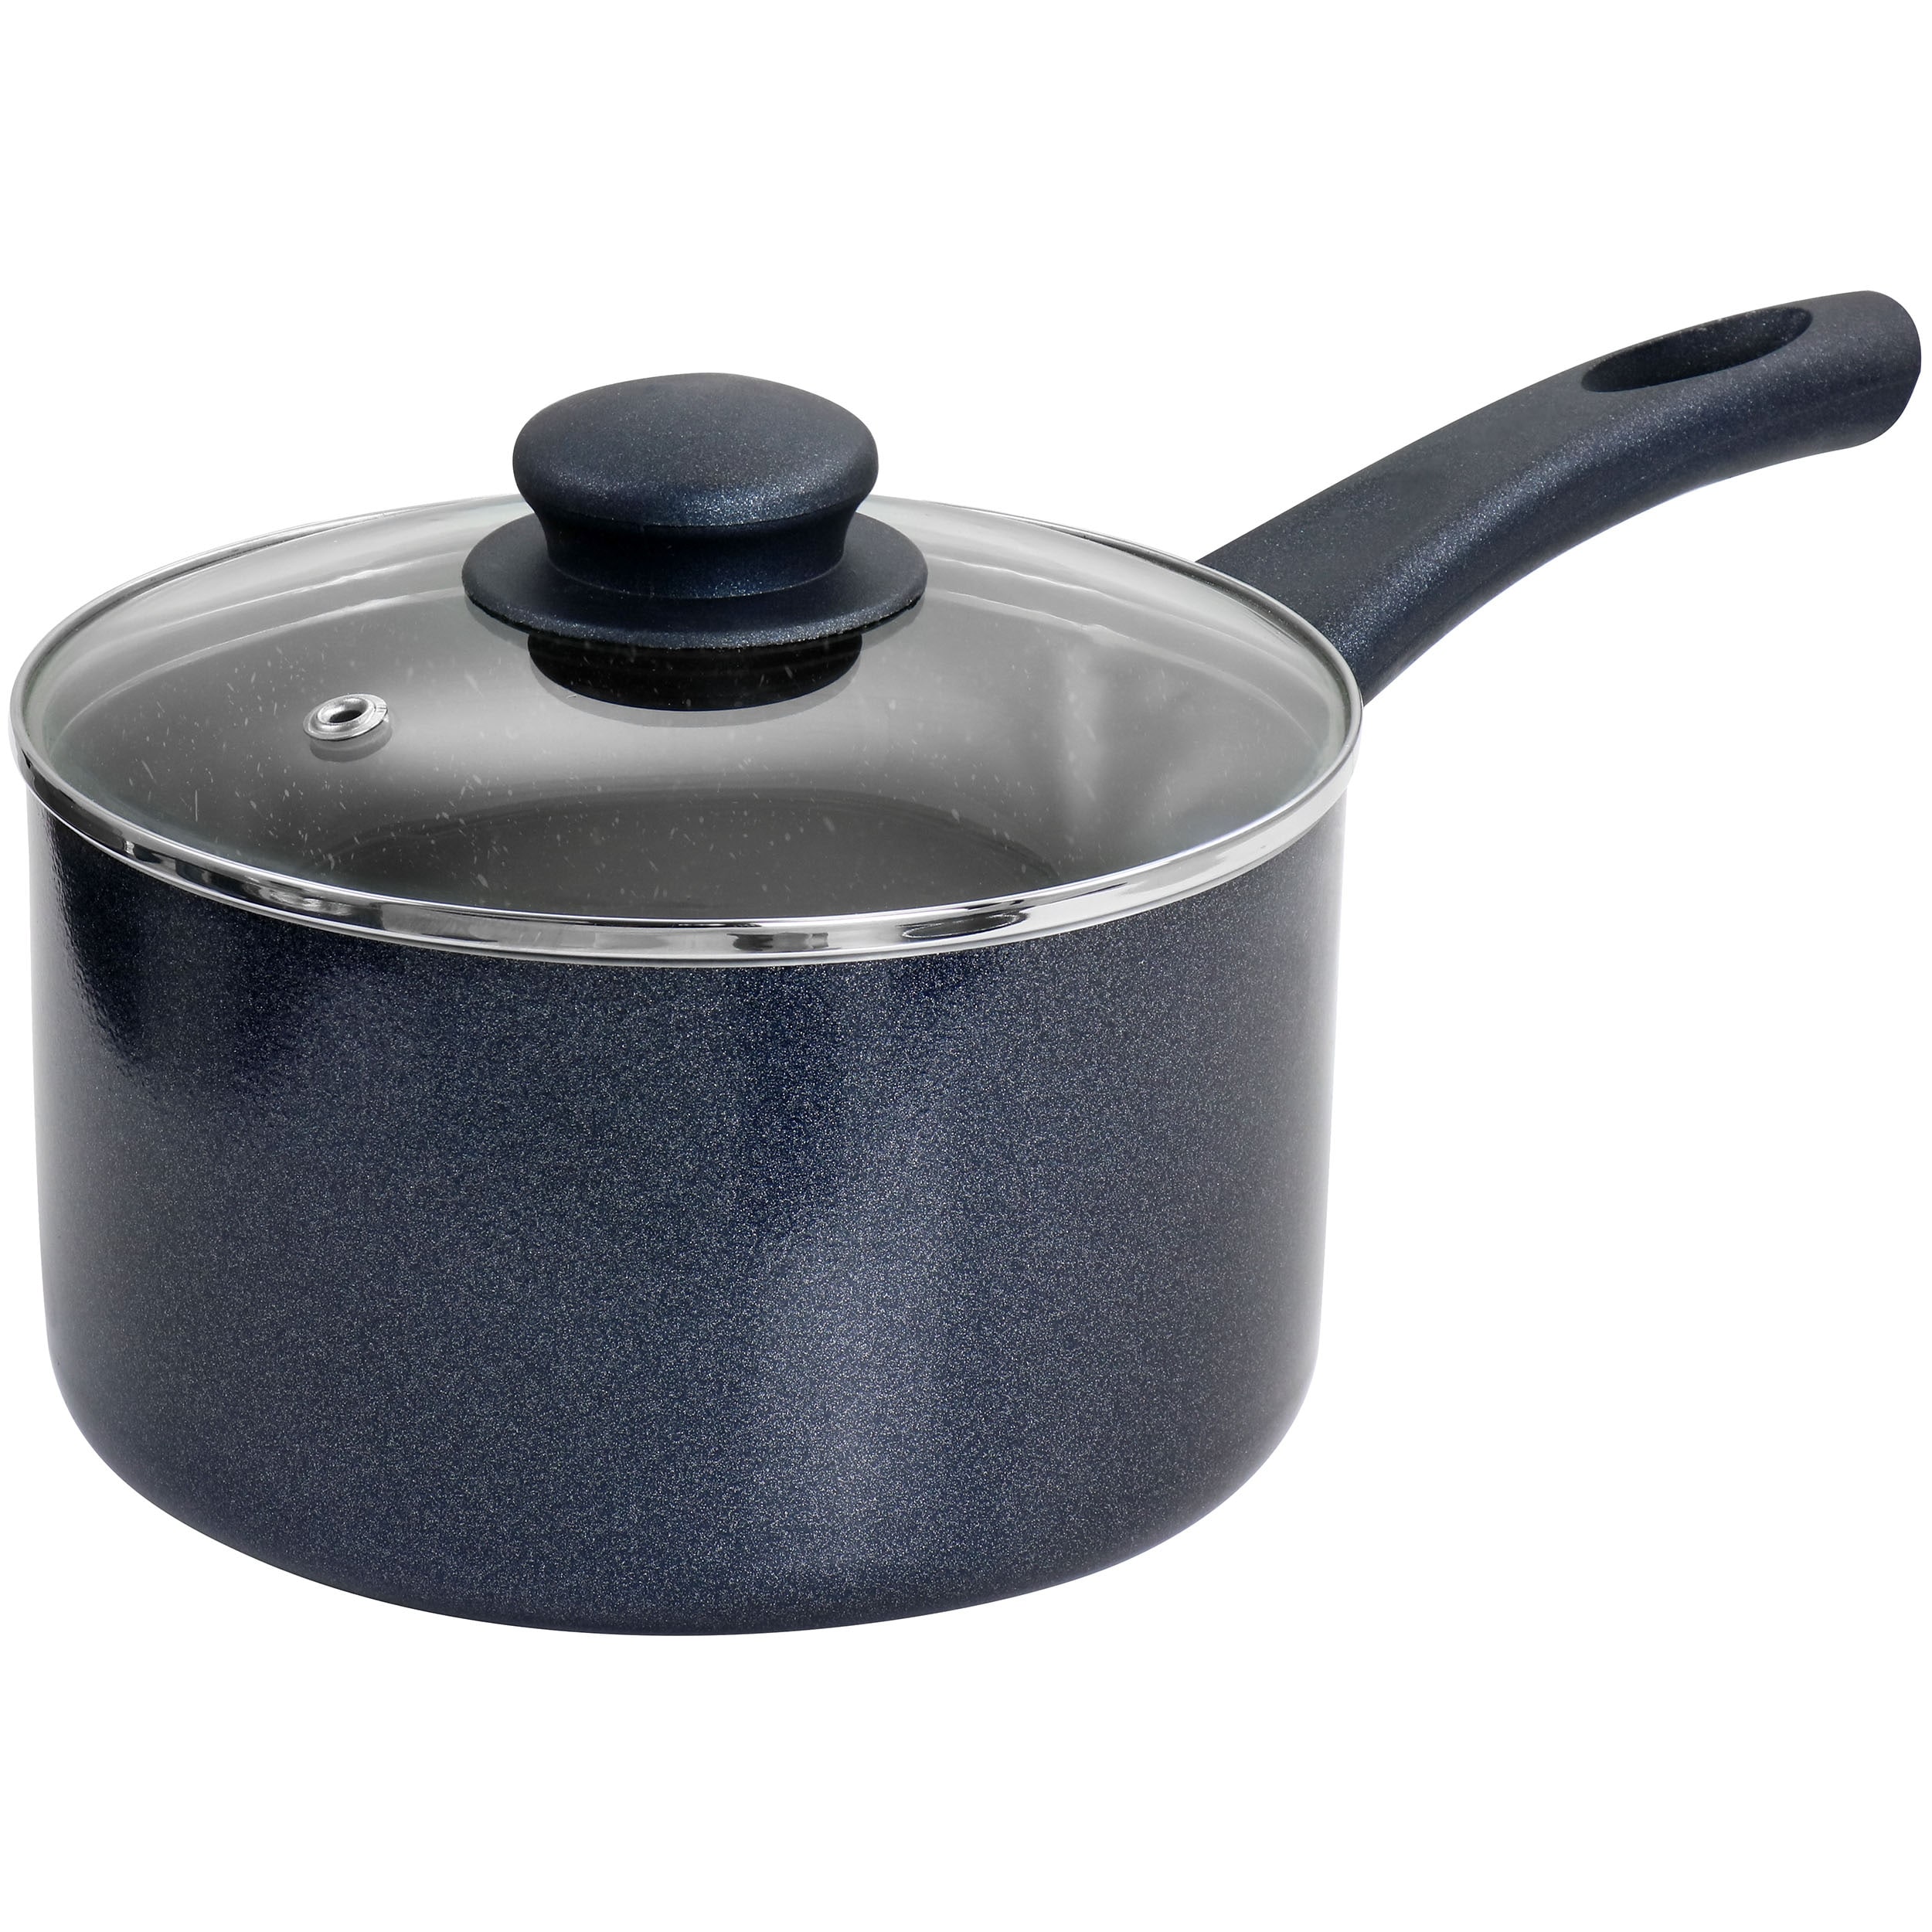 https://ak1.ostkcdn.com/images/products/is/images/direct/1967d458f71f05b1d85caf364e492902b757a32a/Oster-Anetta-2.5-Quart-Nonstick-Saucepan-with-Lid-in-Navy-Blue.jpg